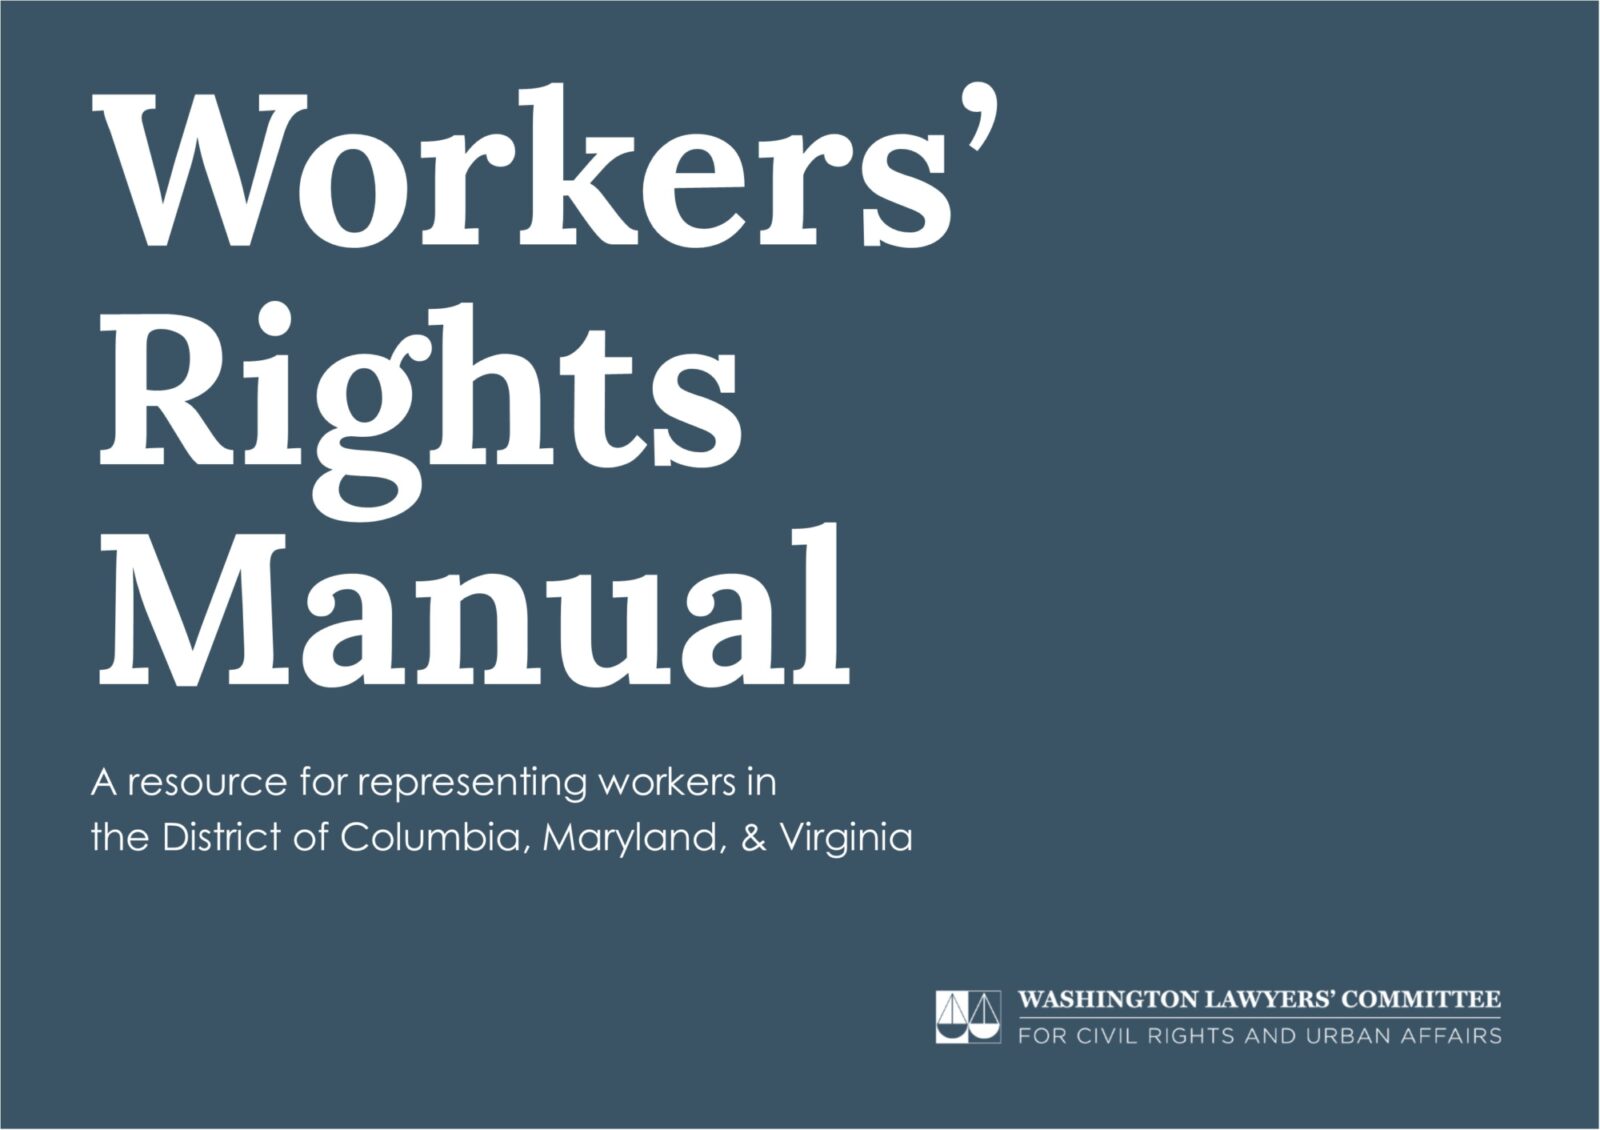 Dark blue grey square with large white text that reads "Workers' Rights Manual," smaller white text reads "A resource for representing workers in the District of Columbia, Maryland, & Virginia," and the logo of the Washington Lawyers' Committee appears in white in the bottom right hand corner